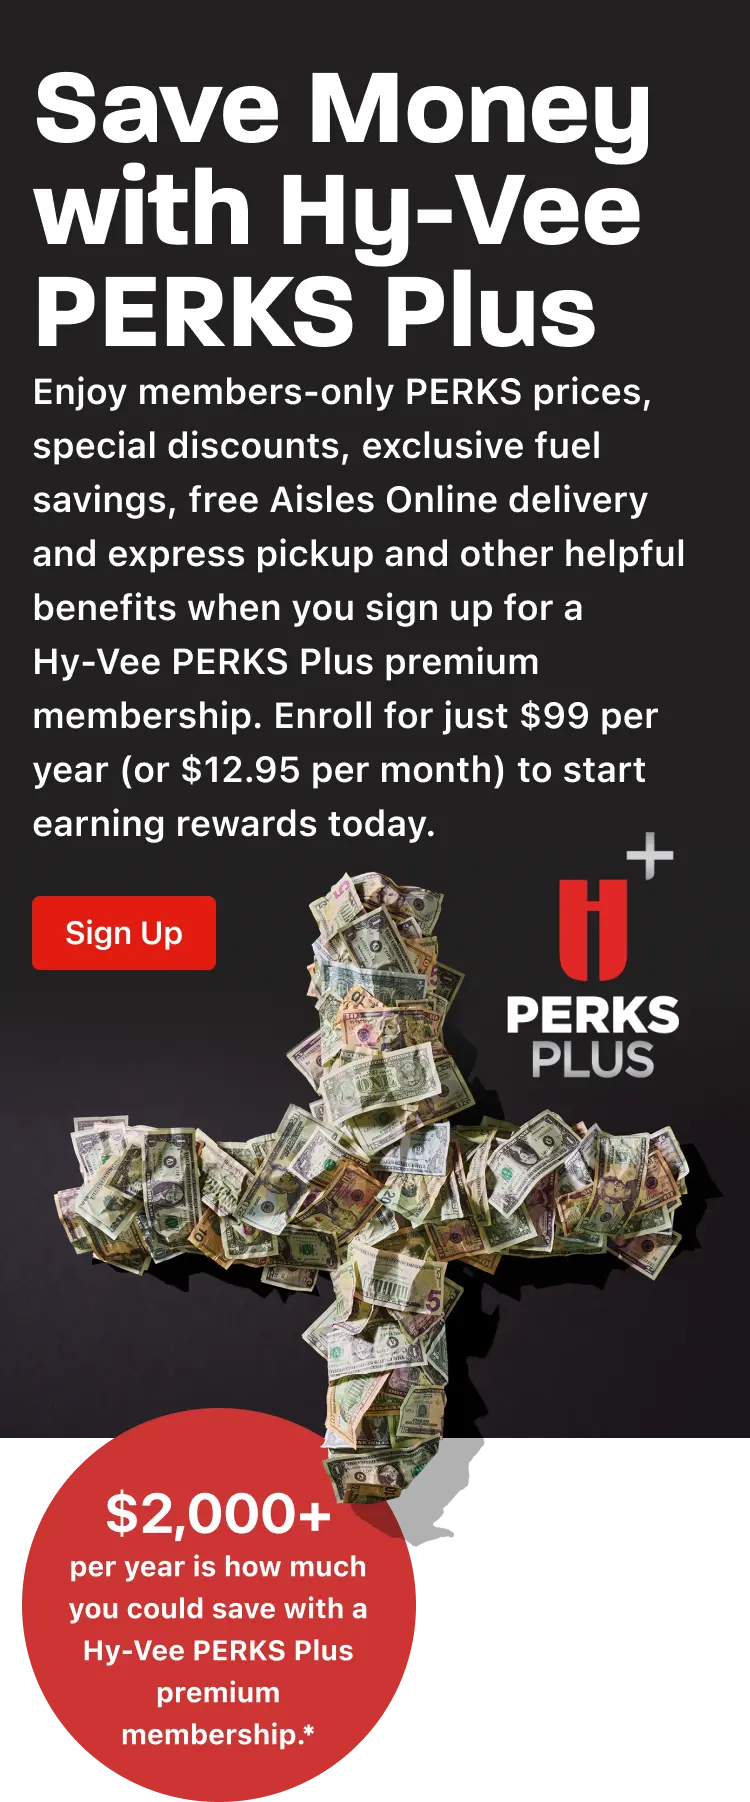 Hy-Vee PERKS Plus Membership: Save Time and Money on Grocery Shopping